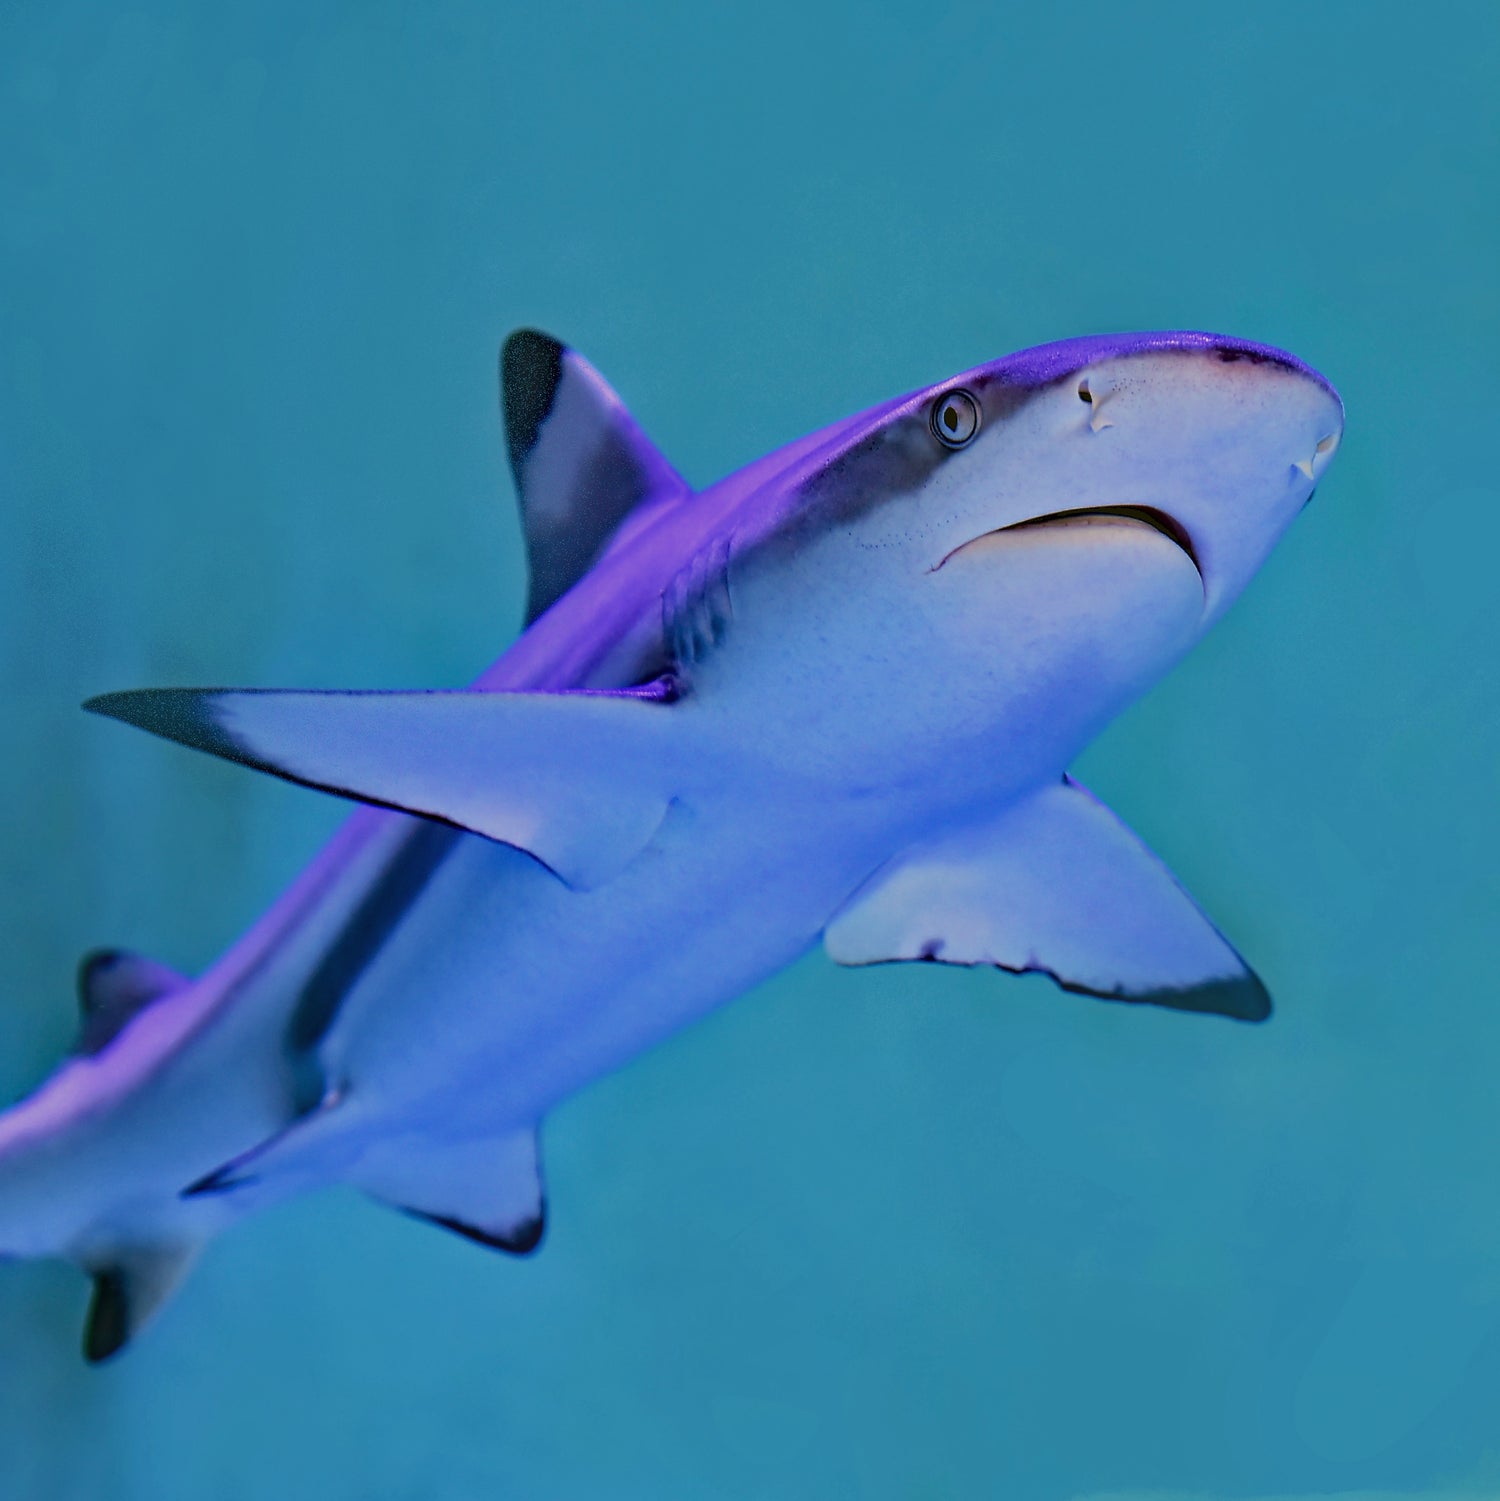 swimming blacktip reef shark - architectconstructor - 10% of profits are donated to Oceana ocean conservation efforts